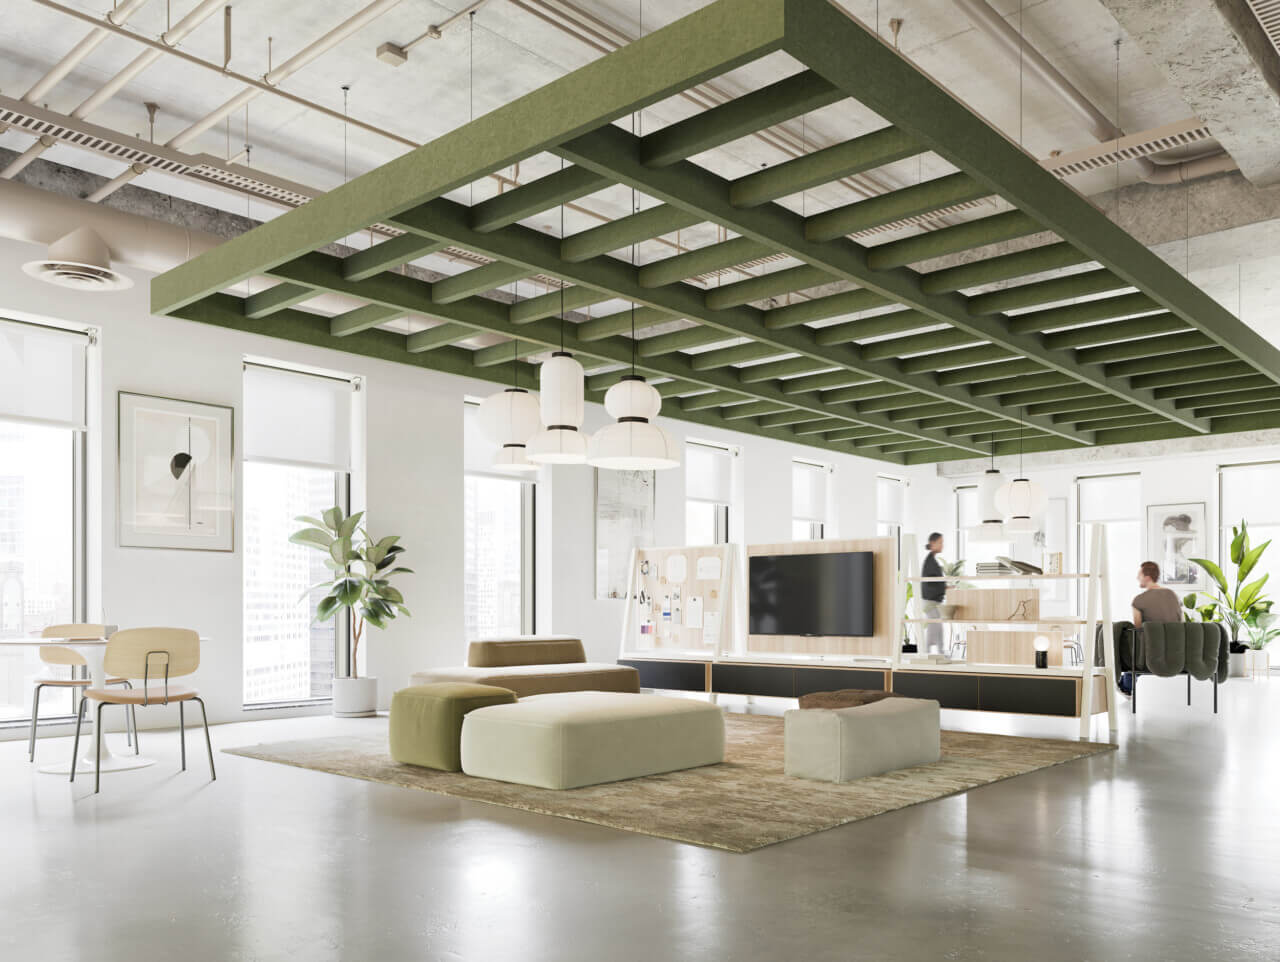 A green and gridded acoustic ceiling system hangs over a seating area